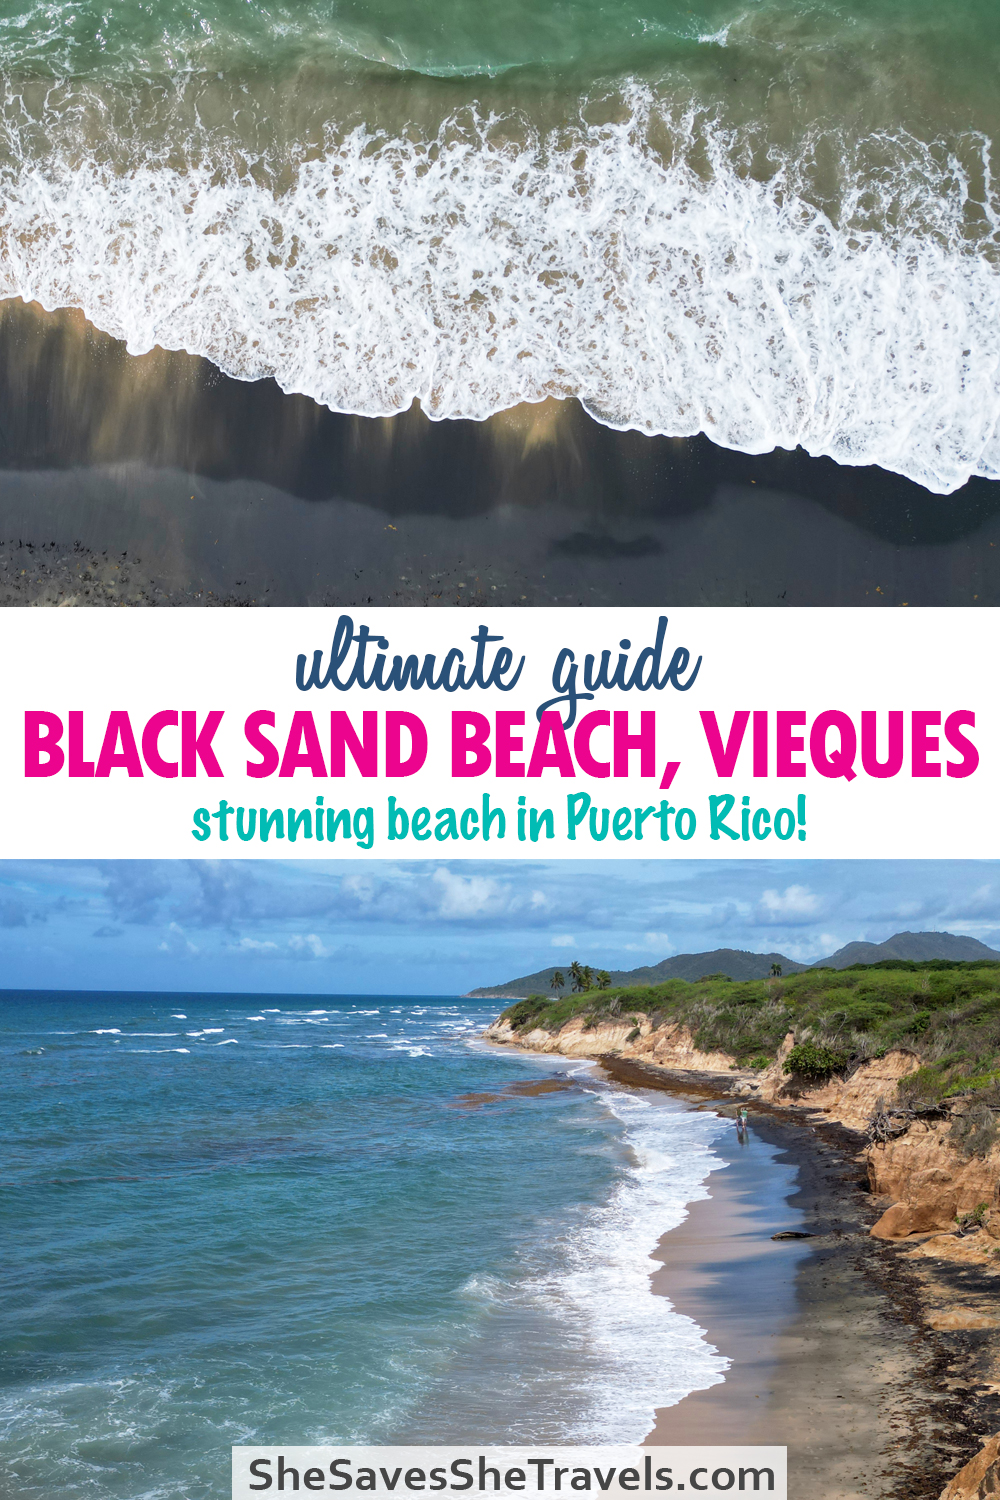 ultimate guide black sand beach, vieques stunning beach in Puerto Rico with photos of beach from above